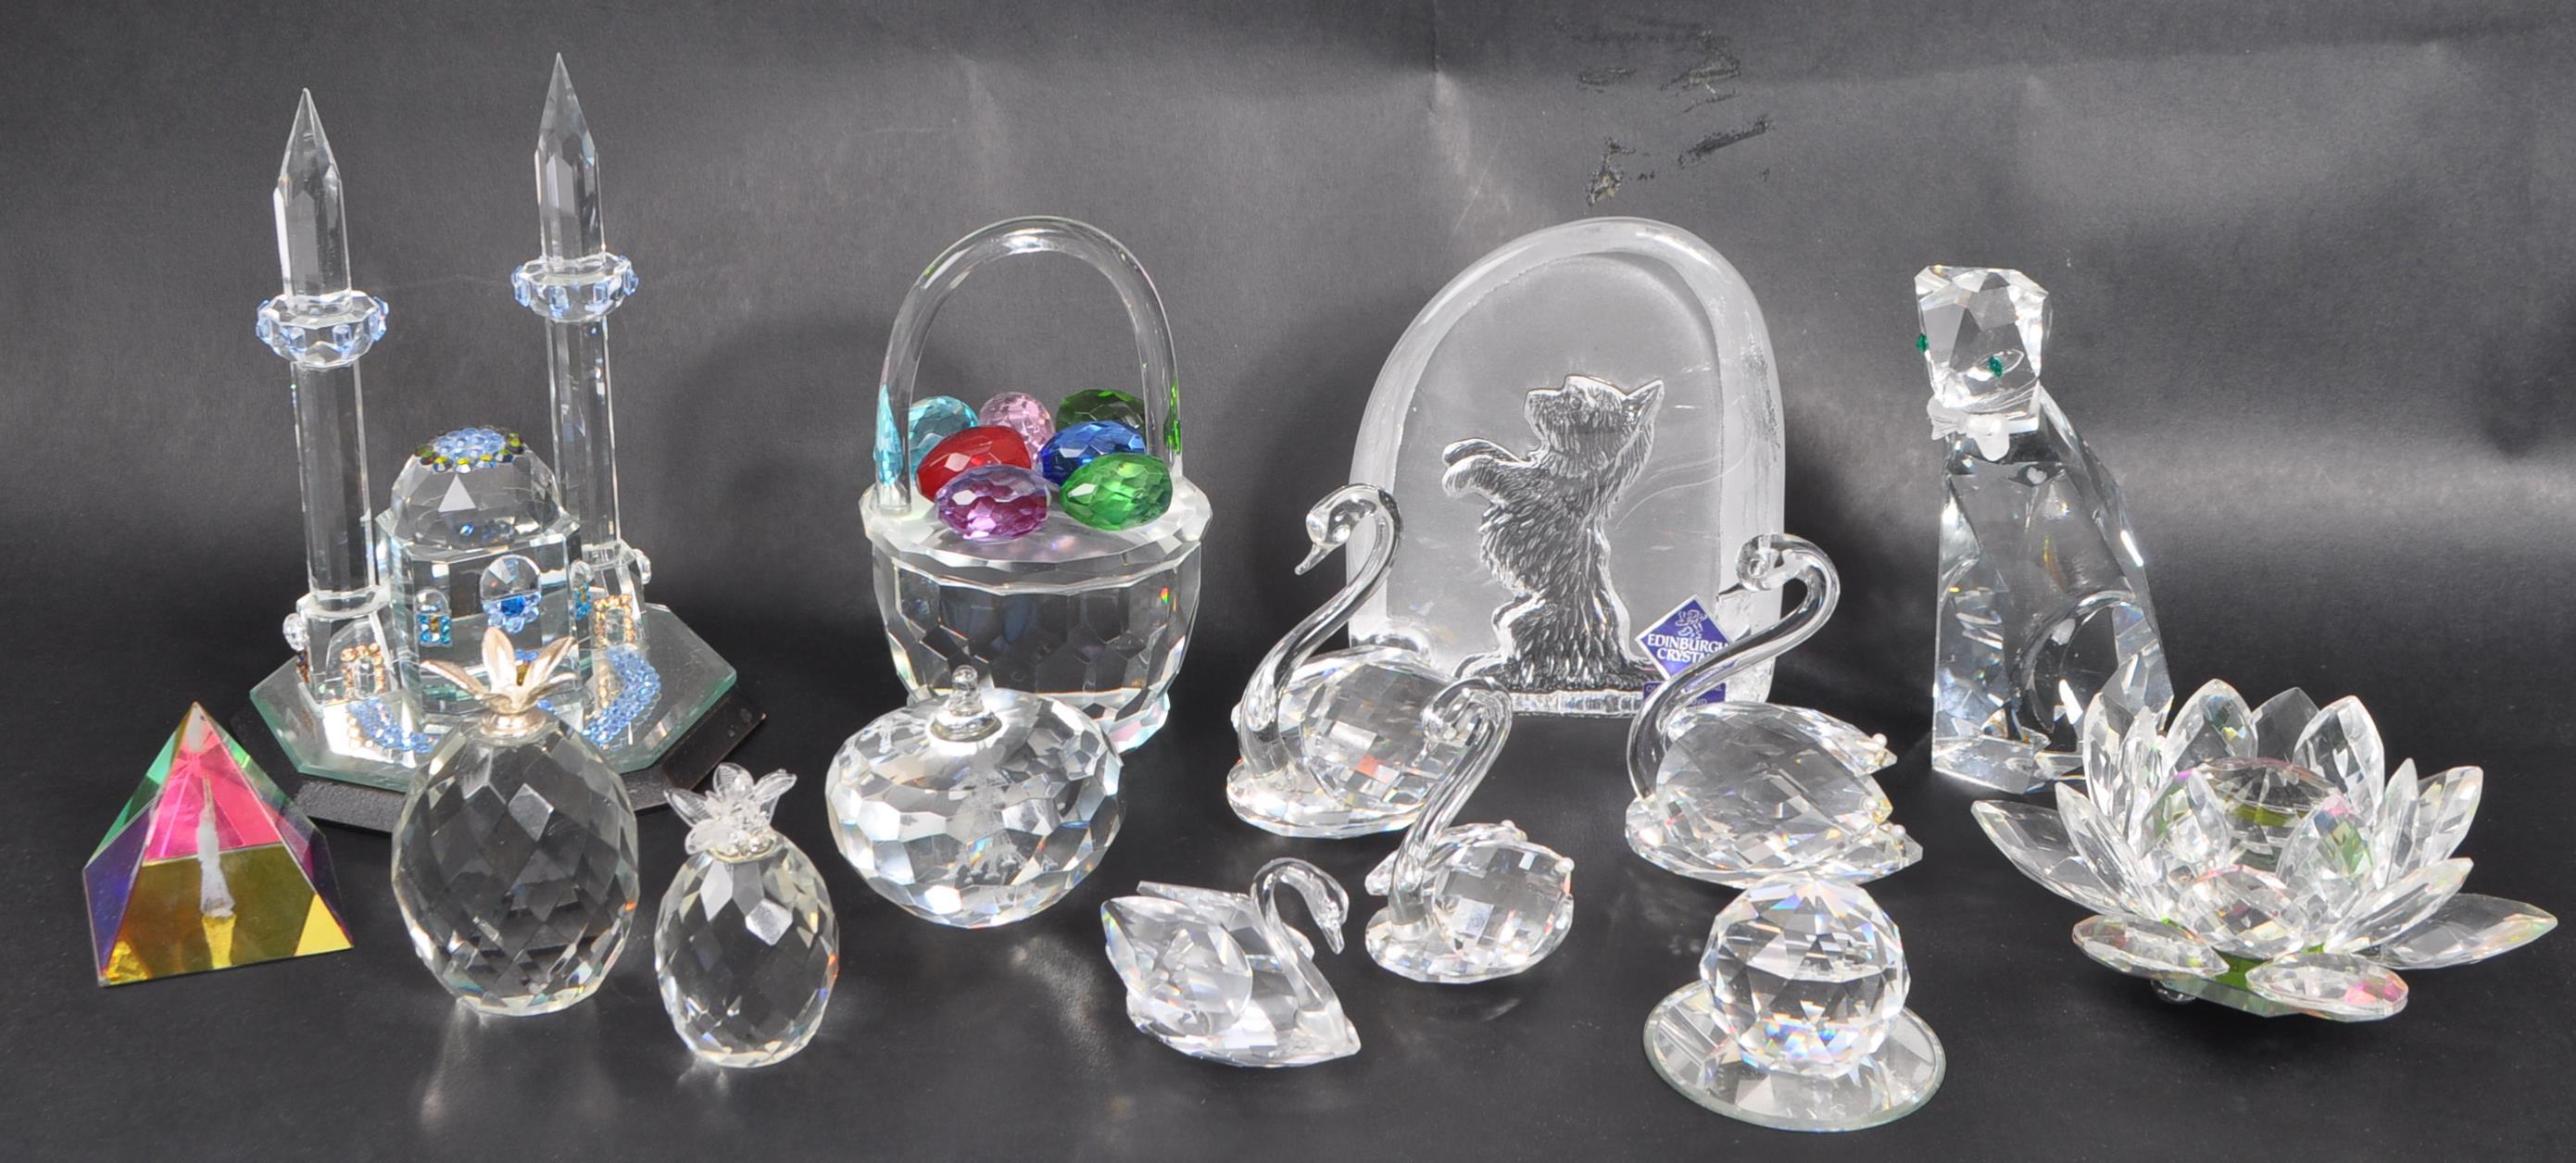 COLLECTION OF SWAROVSKI CRYSTAL AND SIMILAR ORNAMENTS